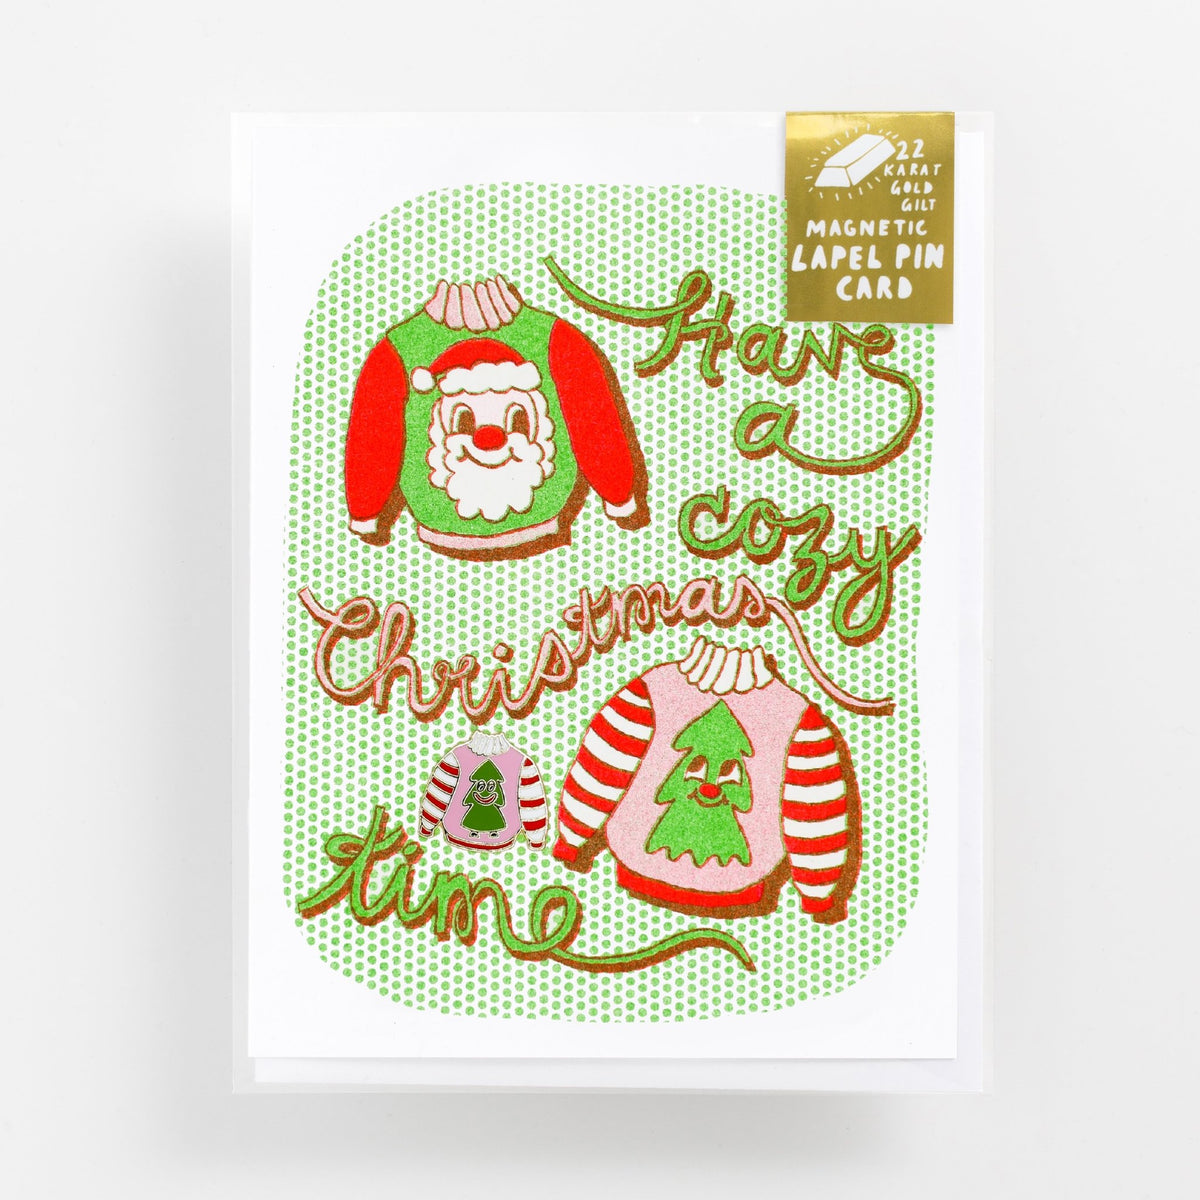 Have a Cozy Xmas Time - Lapel Pin Card - Yellow Owl Workshop